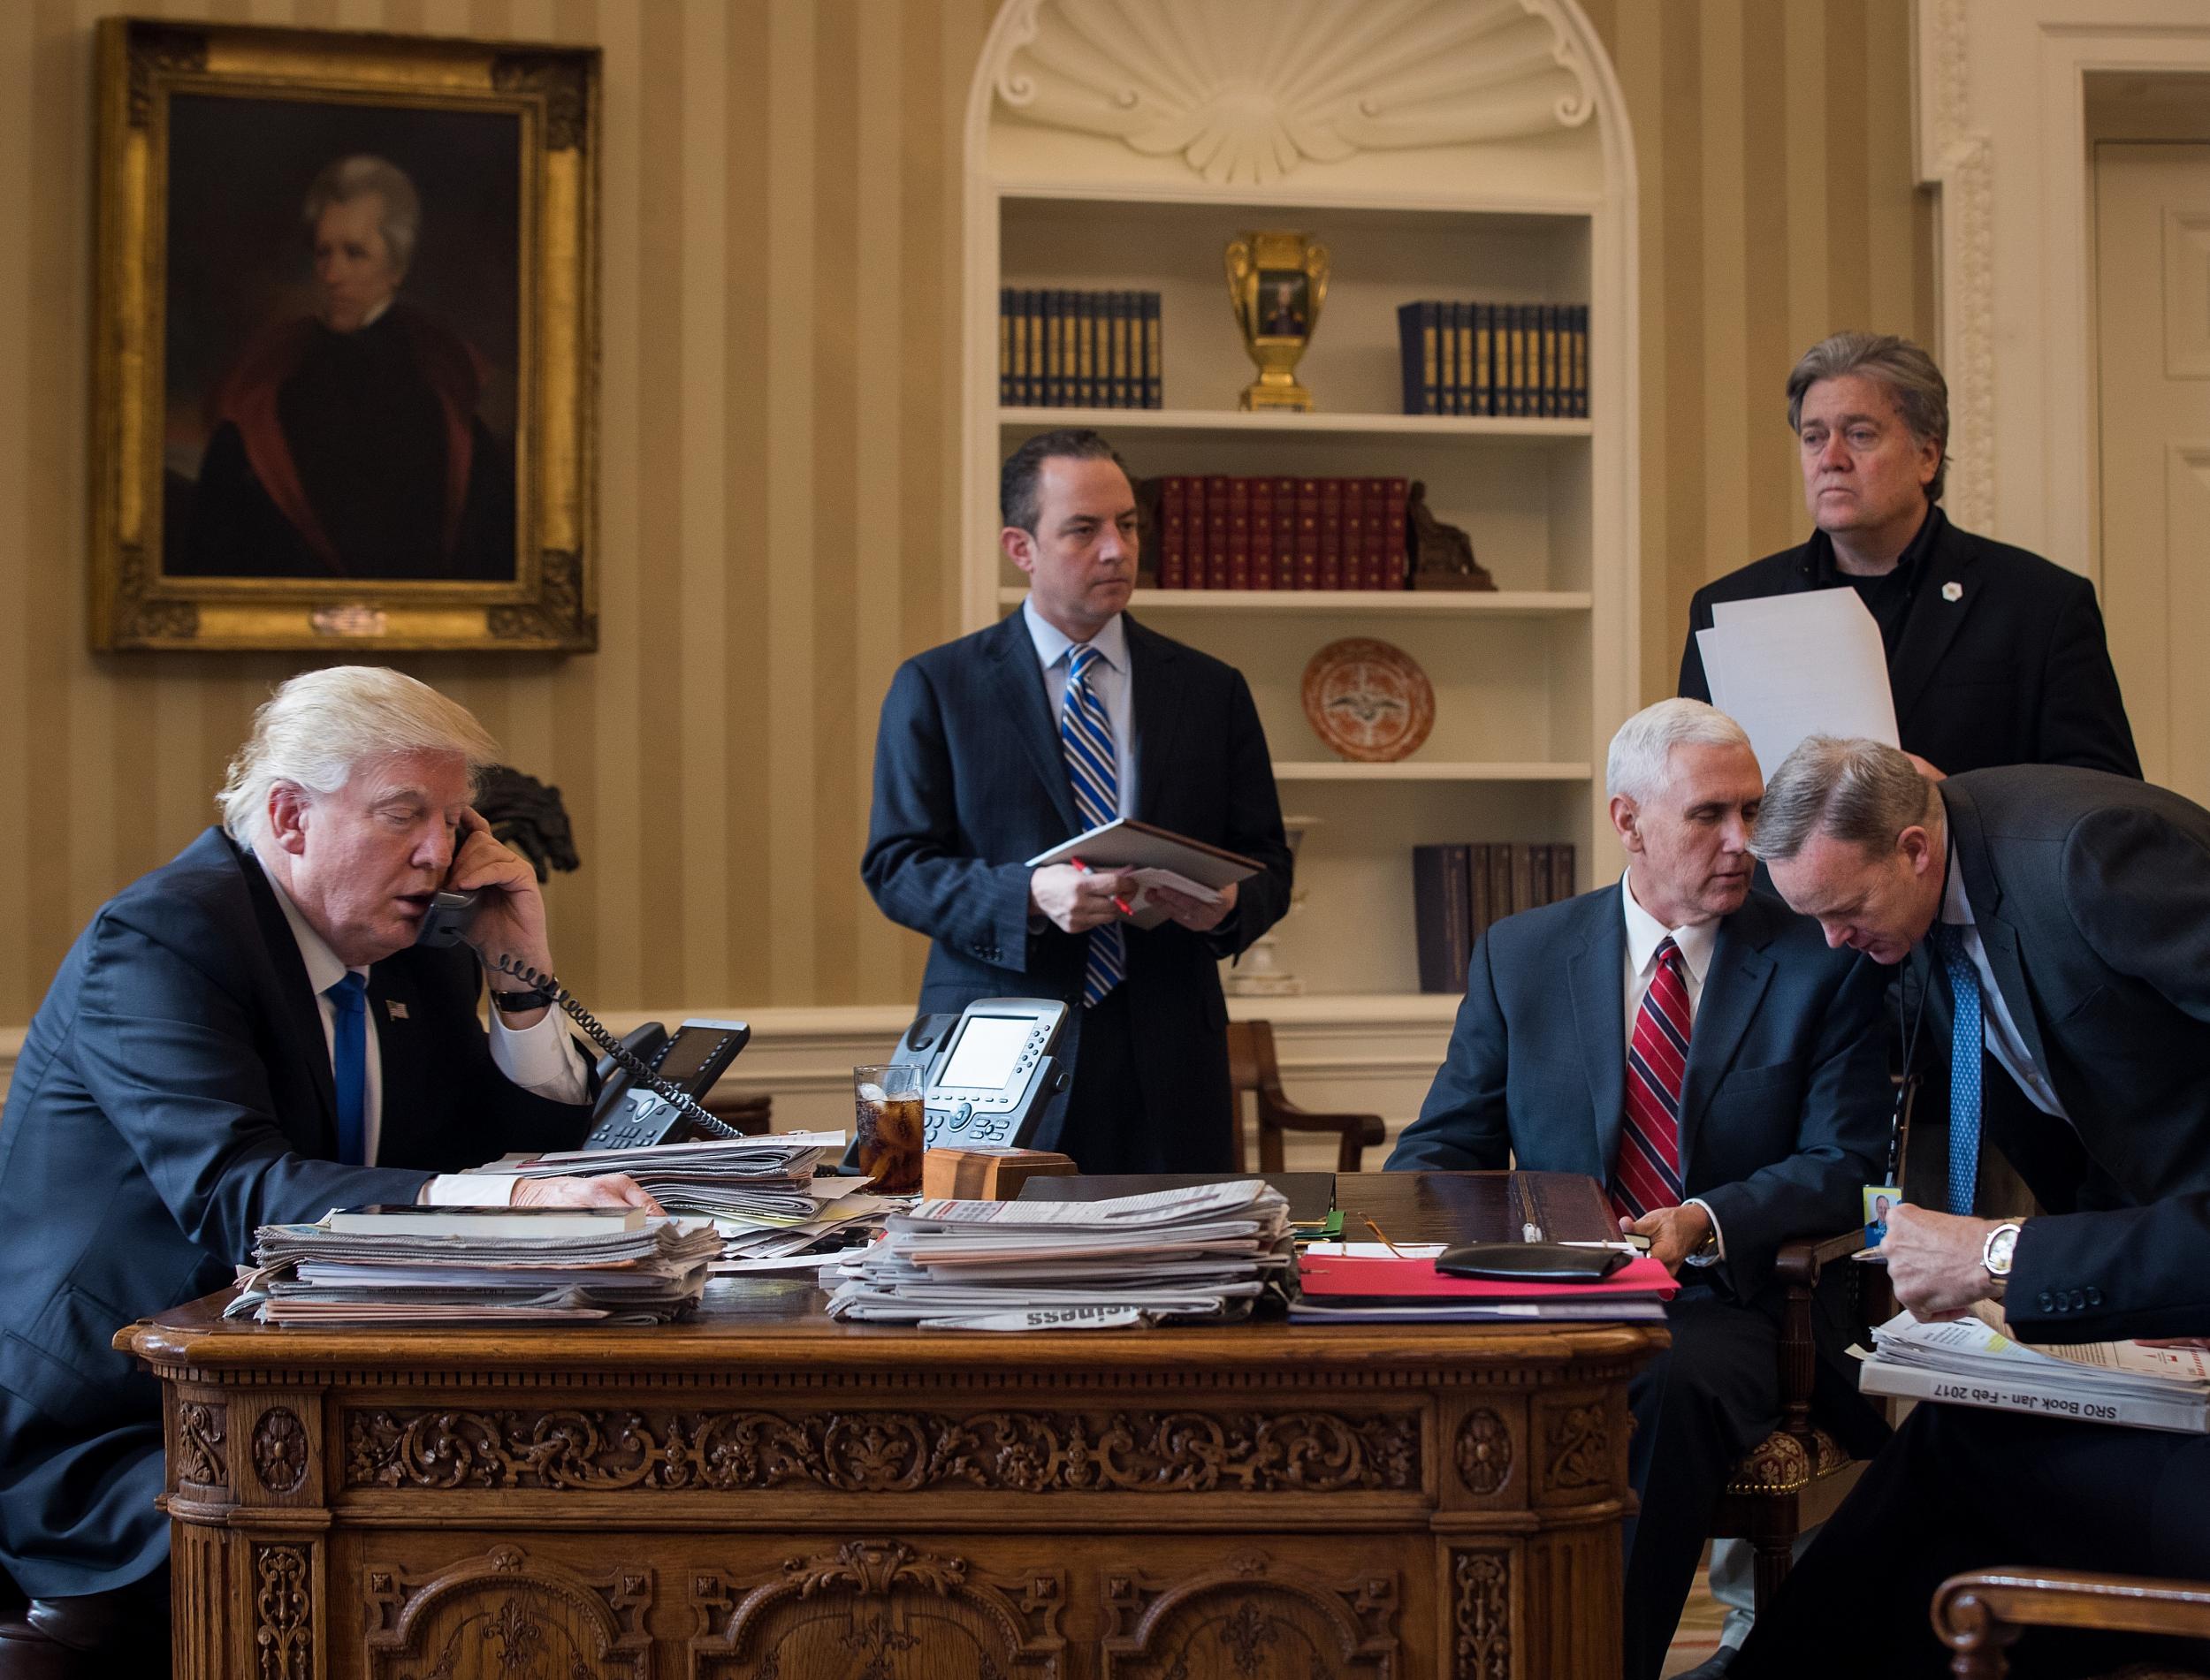 Trump speaks to Putin on the phone in the Oval Office